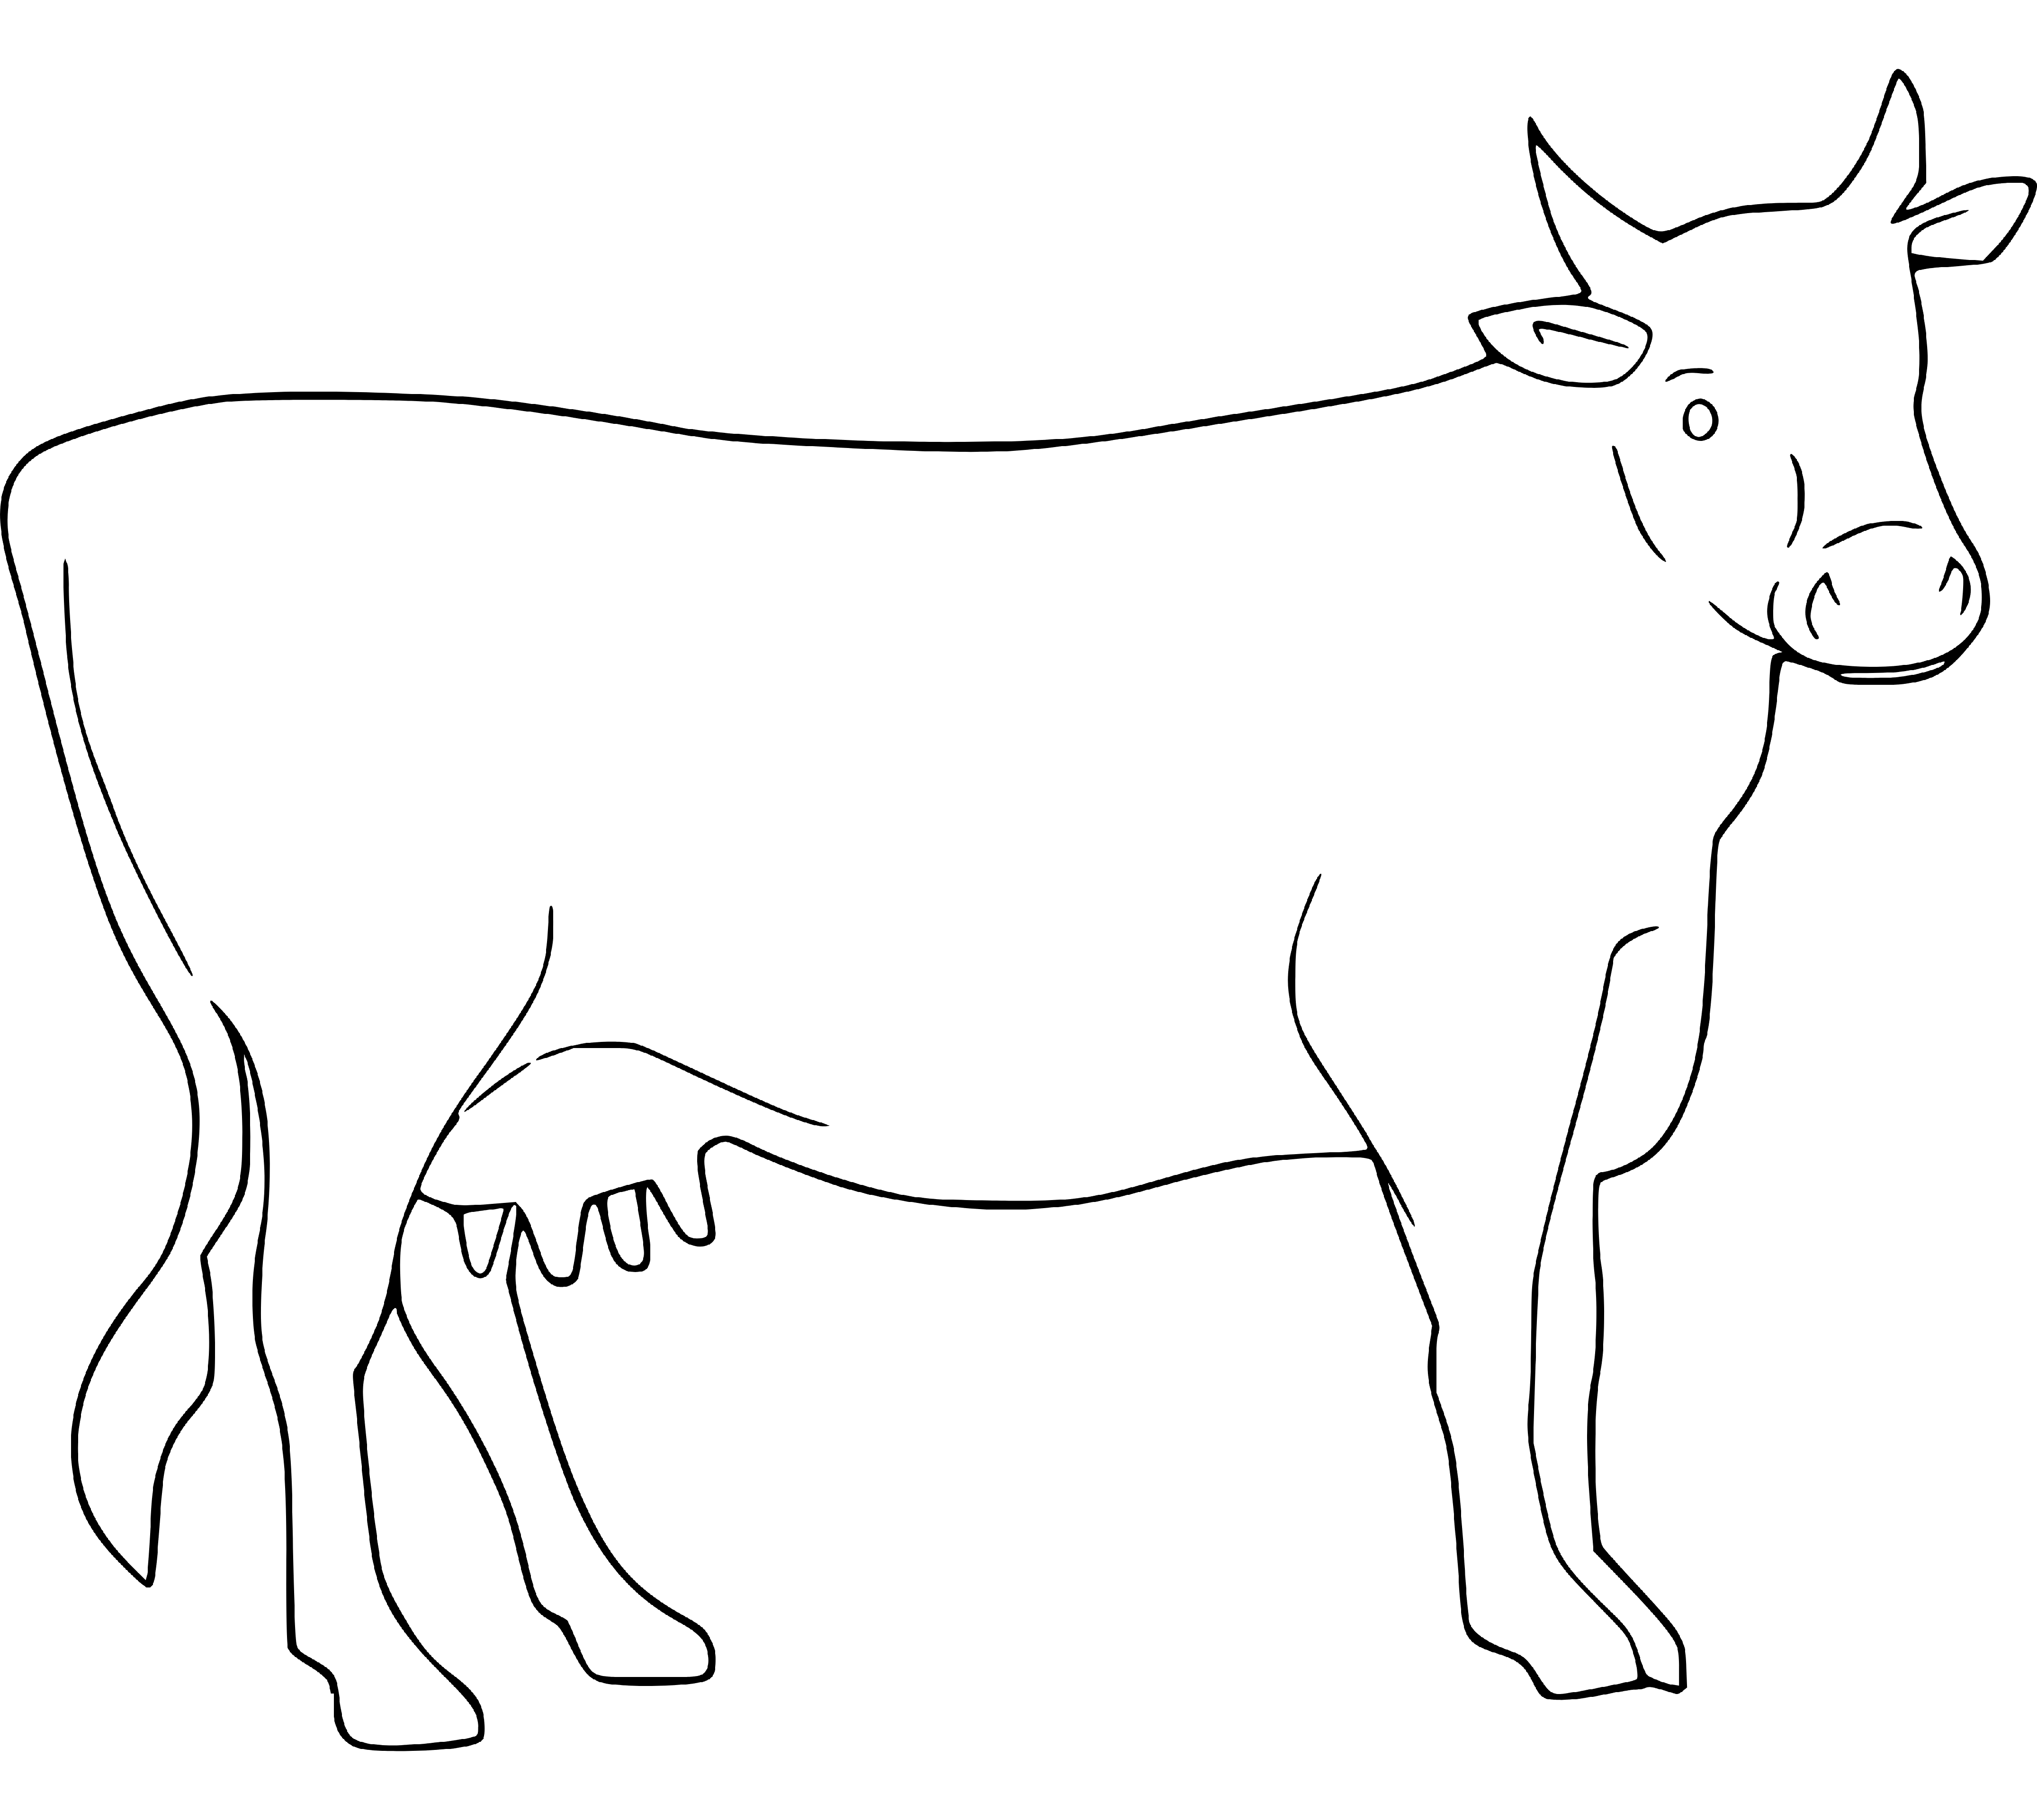 Printable Cow sketching Coloring Page for kids.